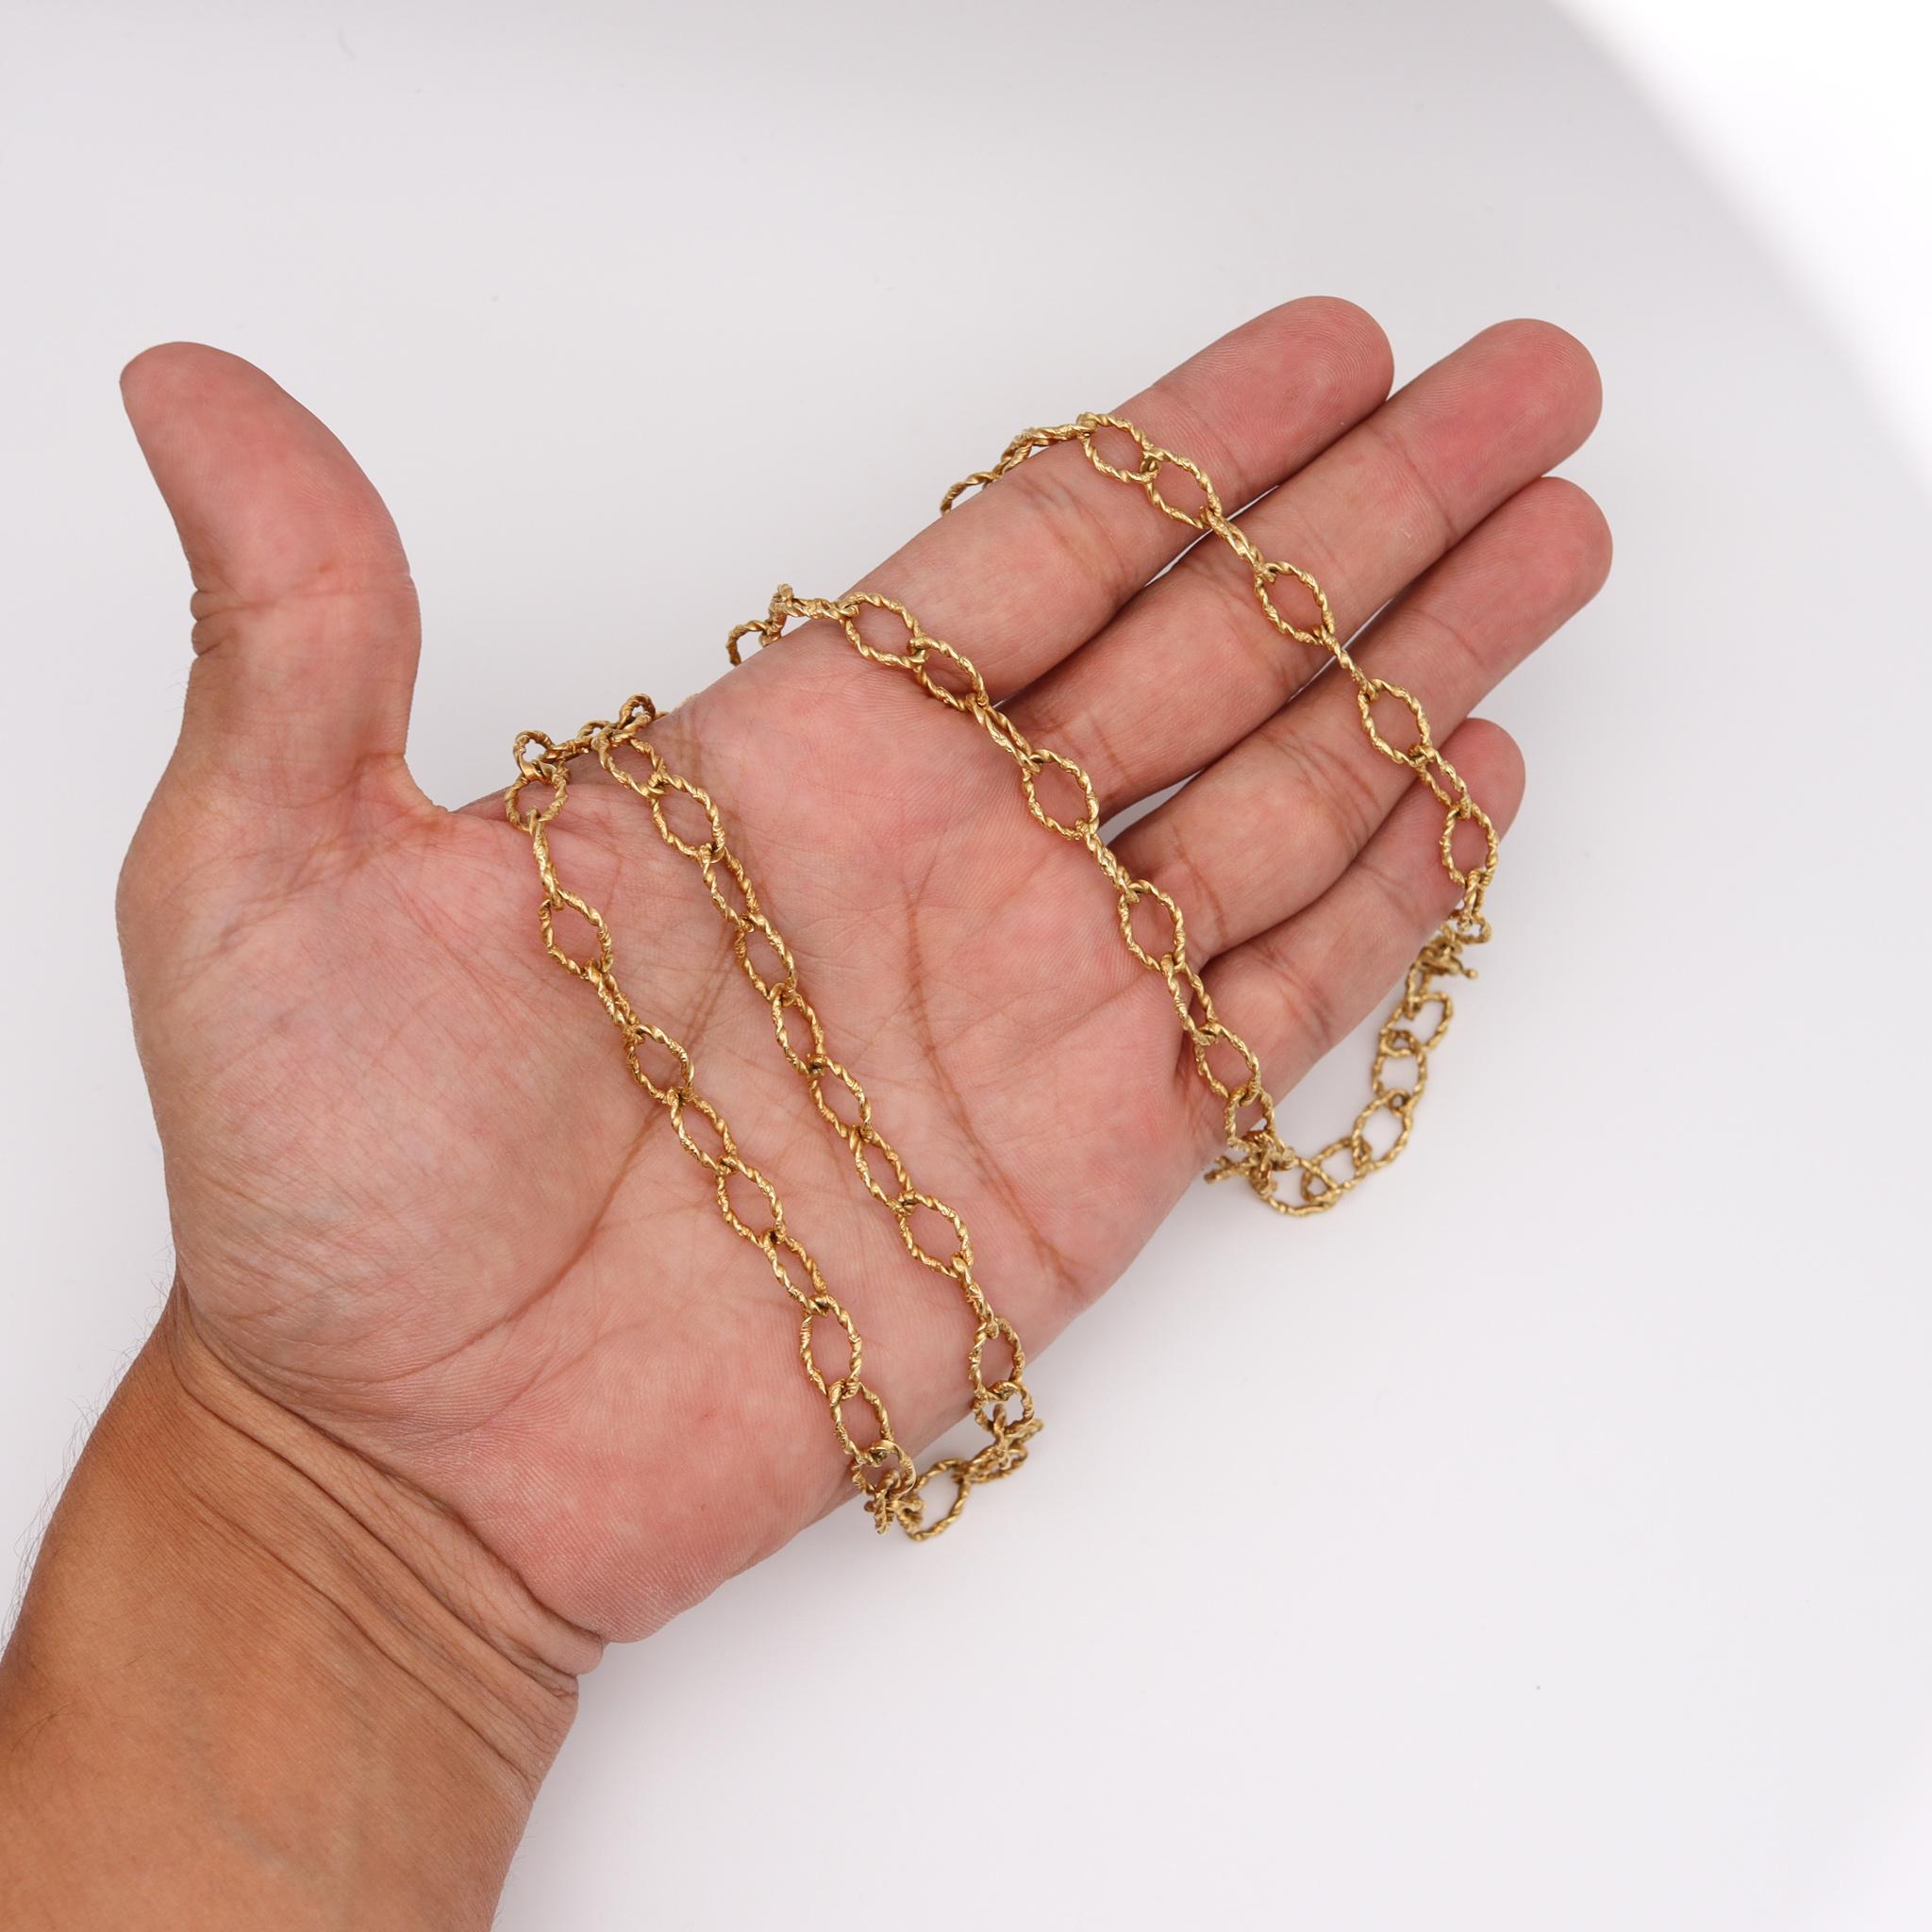 Italian Retro 1970 Modernist Long Chain with Textured Links in 18Kt Yellow Gold 3